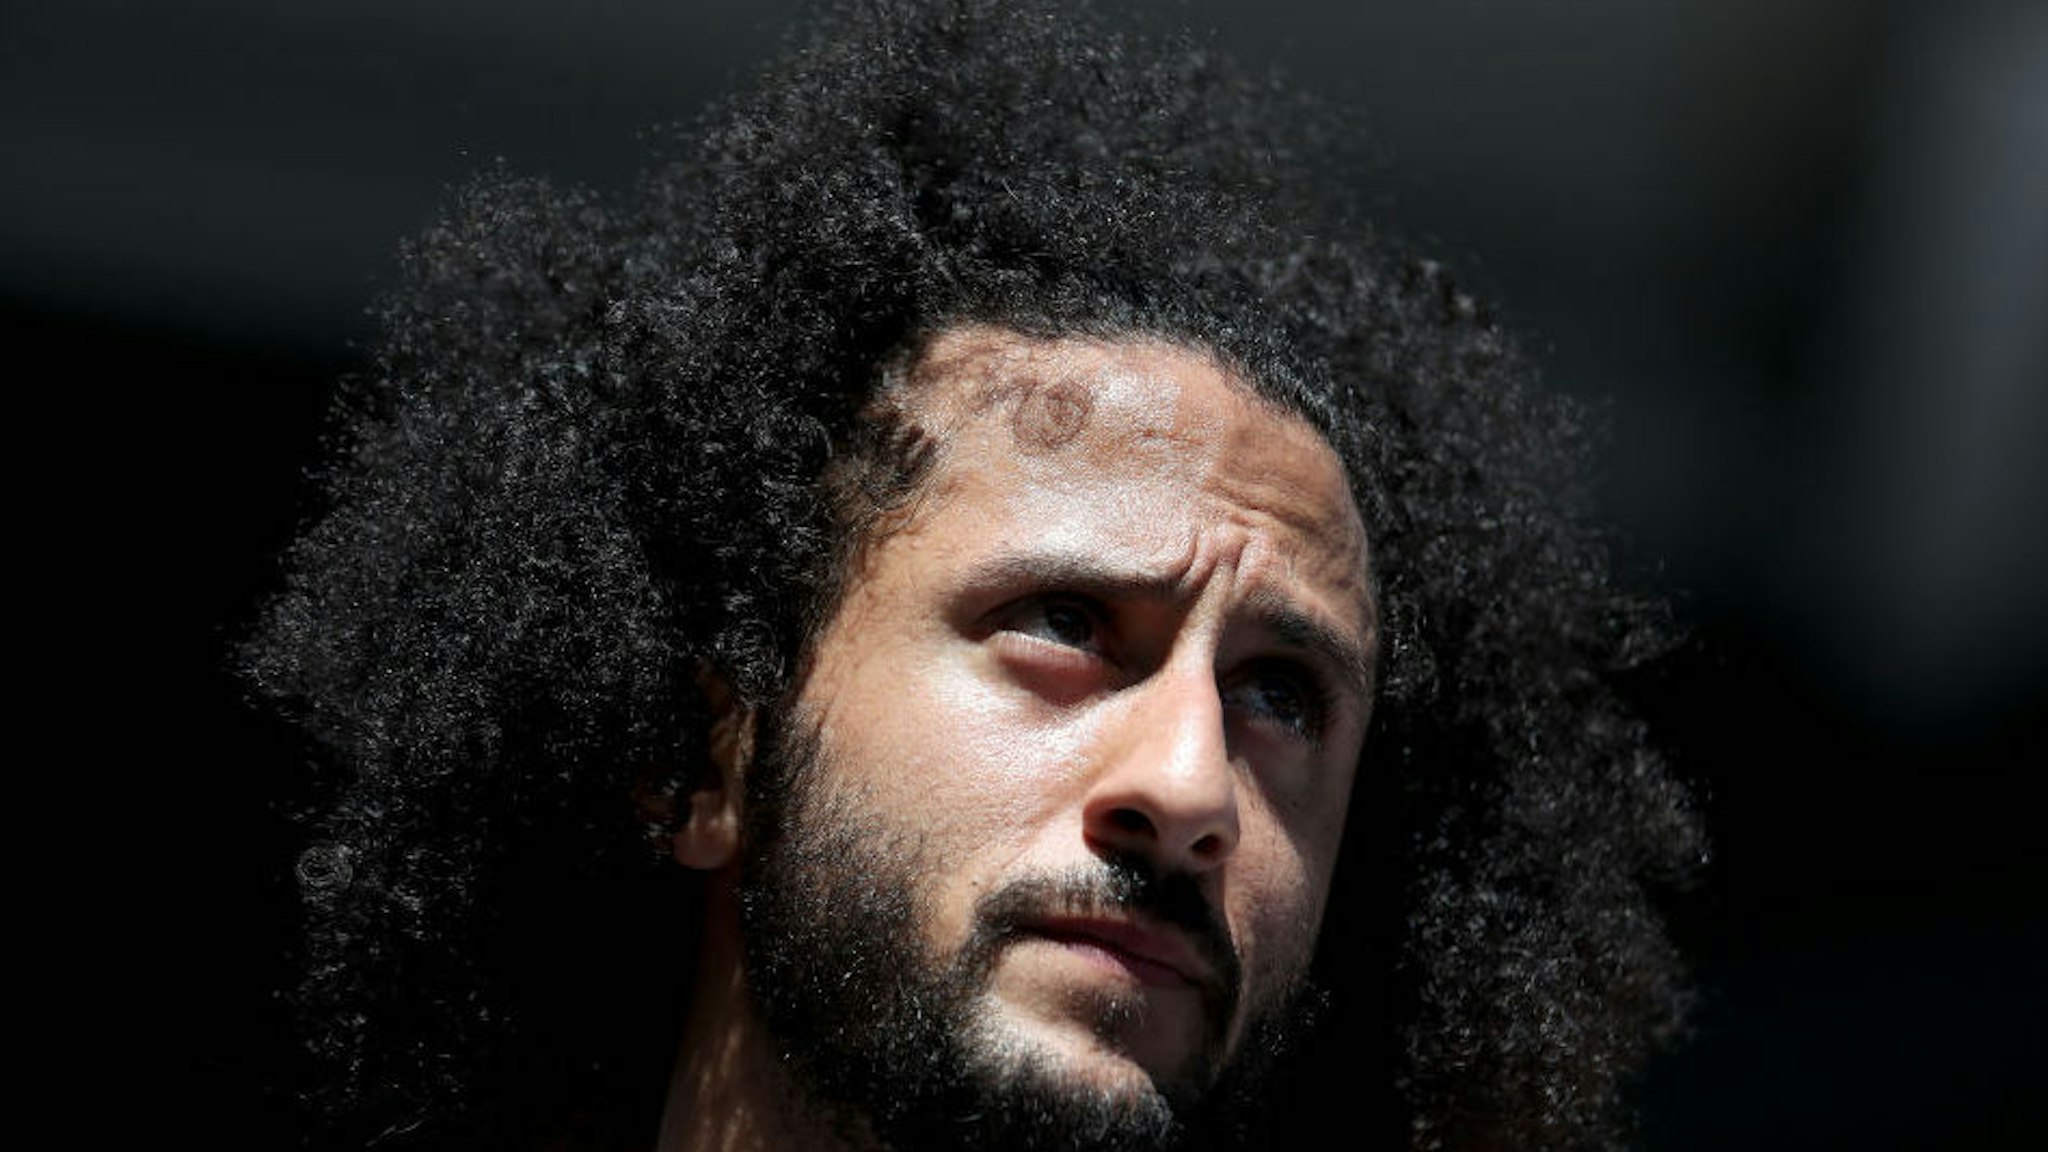 NEW YORK, NEW YORK - AUGUST 29: Former San Francisco 49er Colin Kaepernick watches a Women's Singles second round match between Naomi Osaka of Japan and Magda Linette of Poland on day four of the 2019 US Open at the USTA Billie Jean King National Tennis Center on August 29, 2019 in Queens borough of New York City.